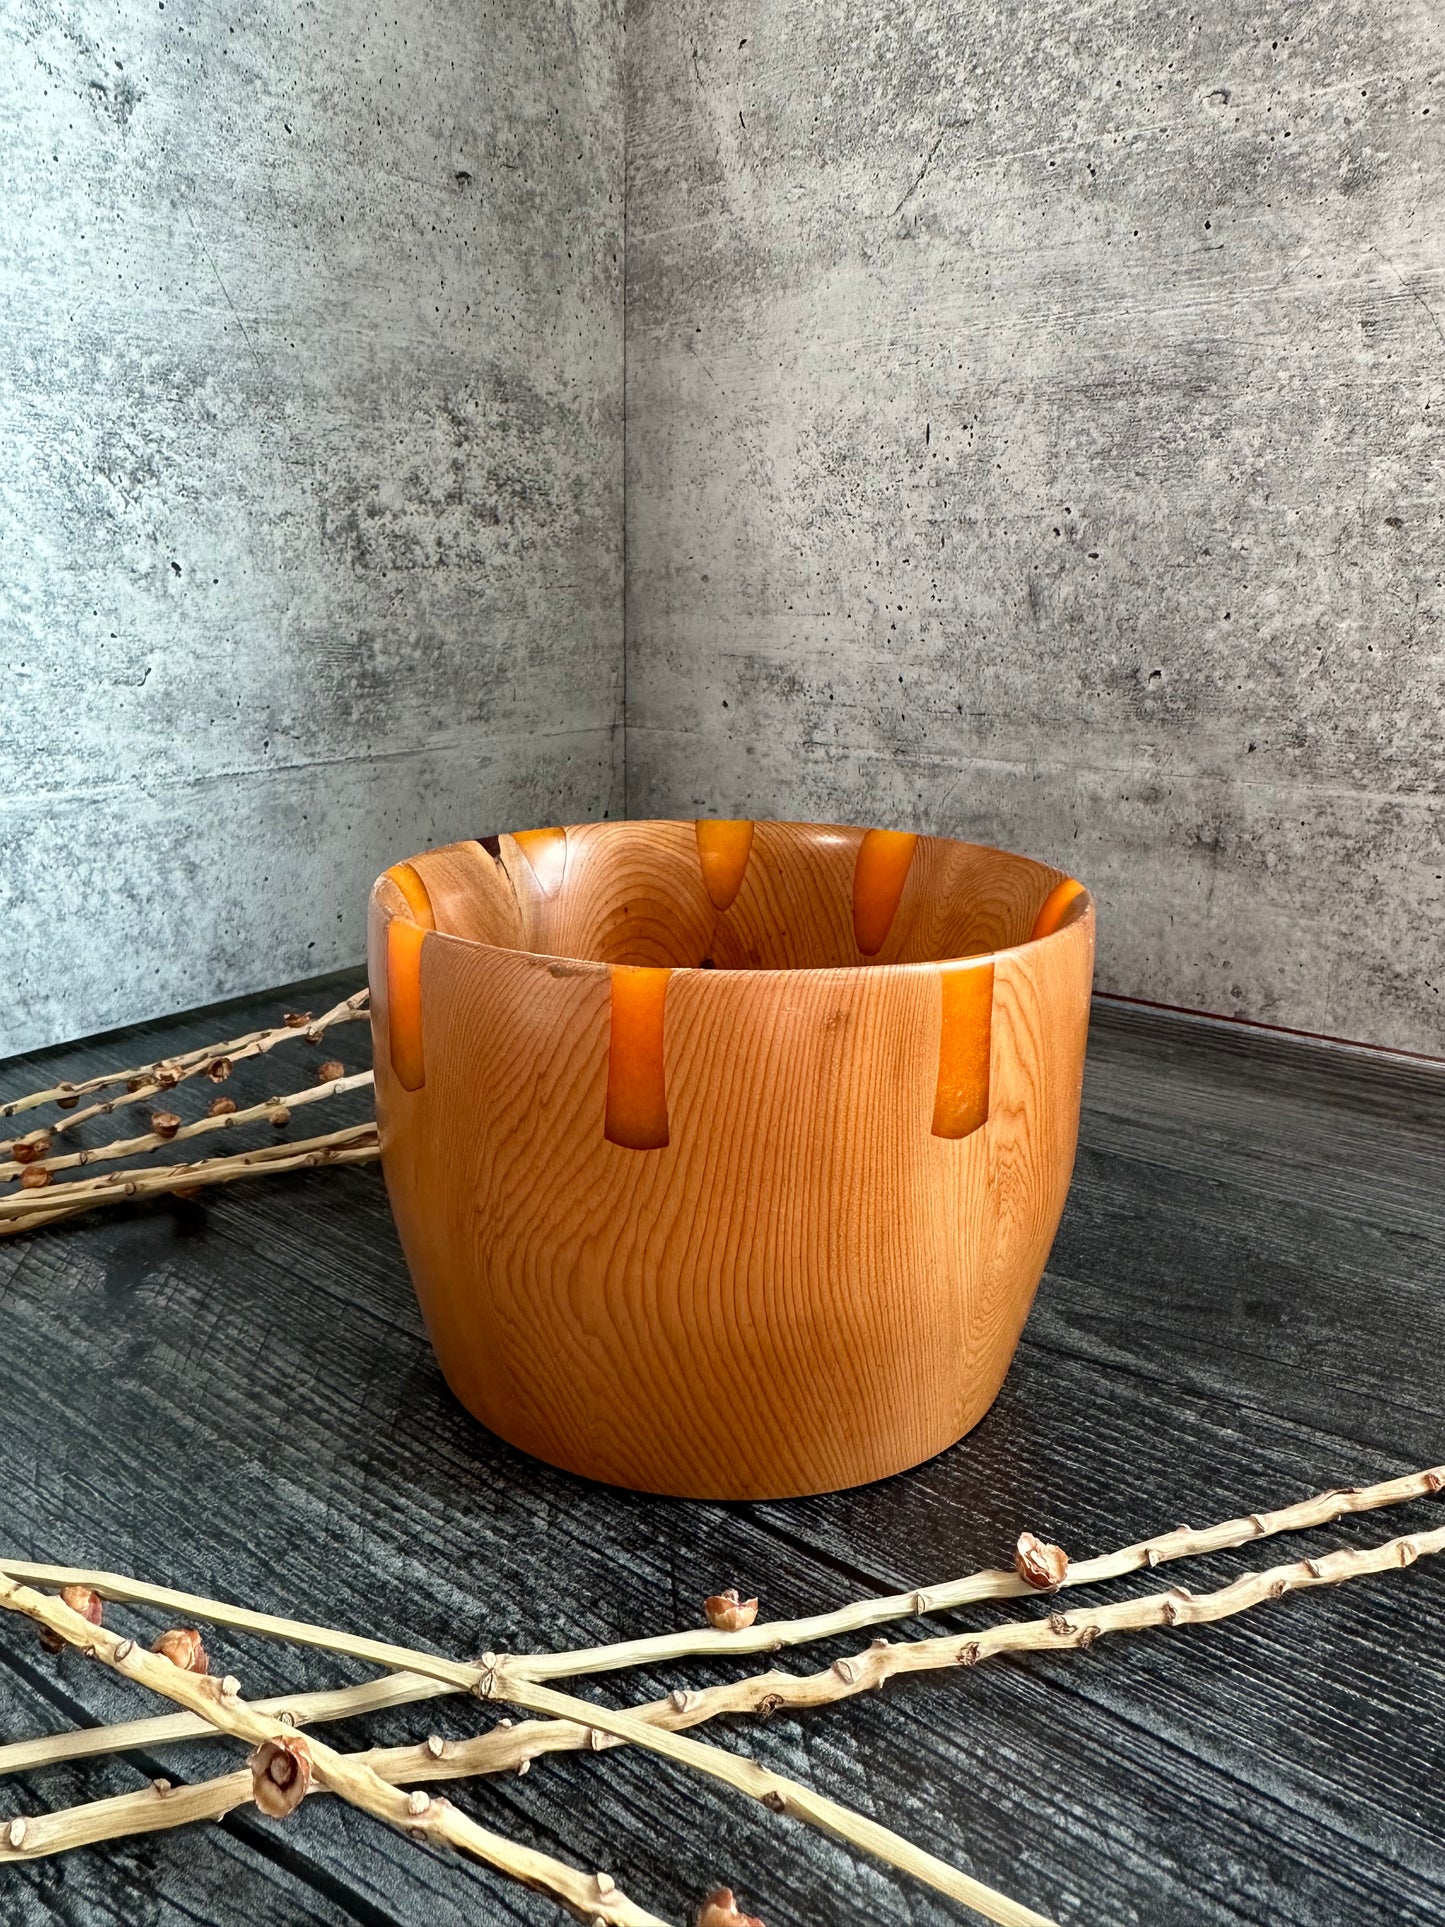 Fruitwood With Orange Resin Hand Turned Bowl